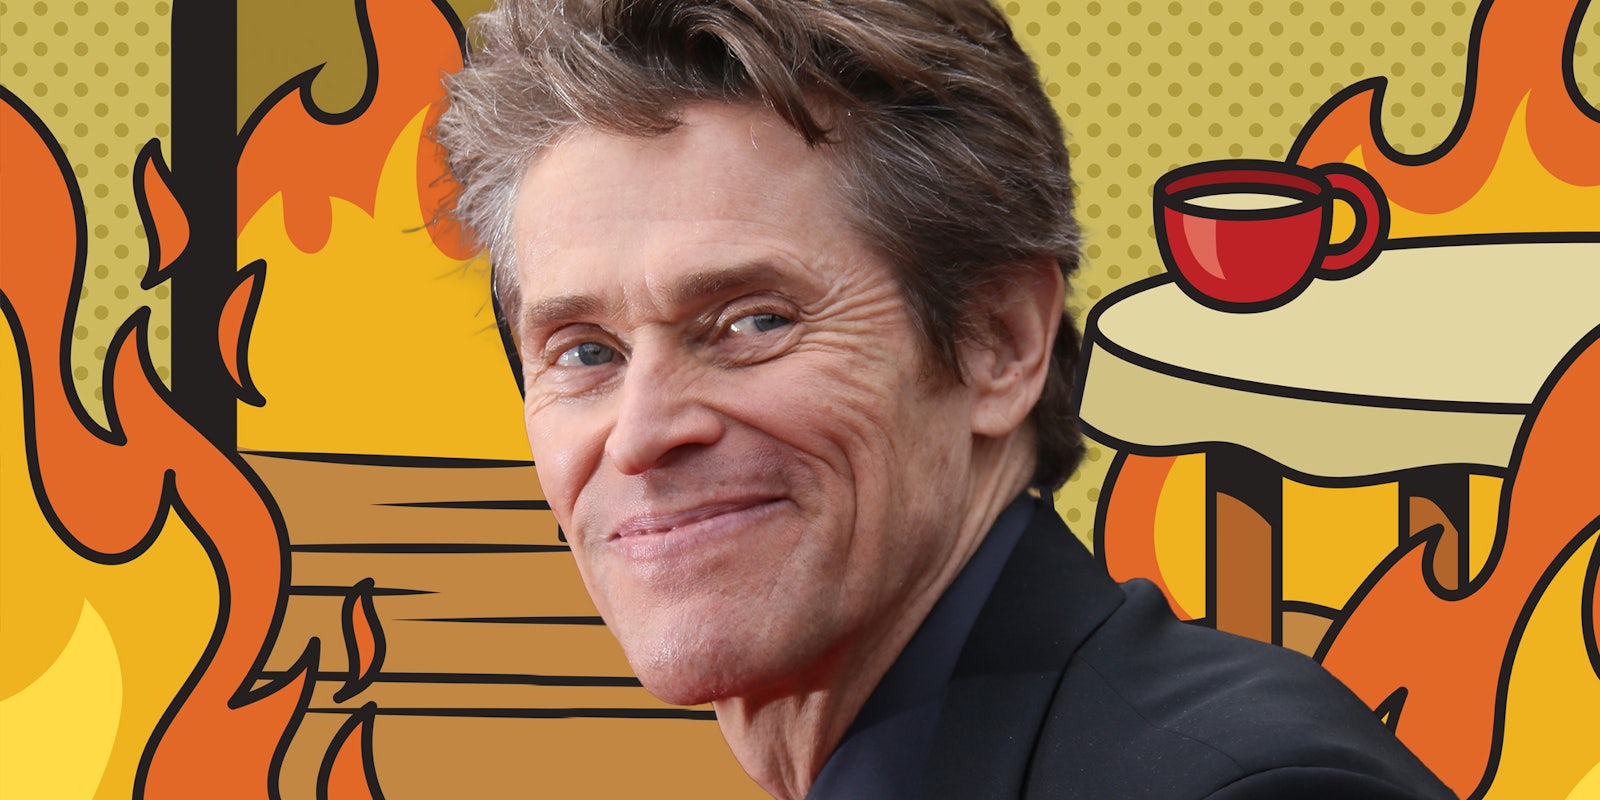 Willem Dafoe in front of flames house meme